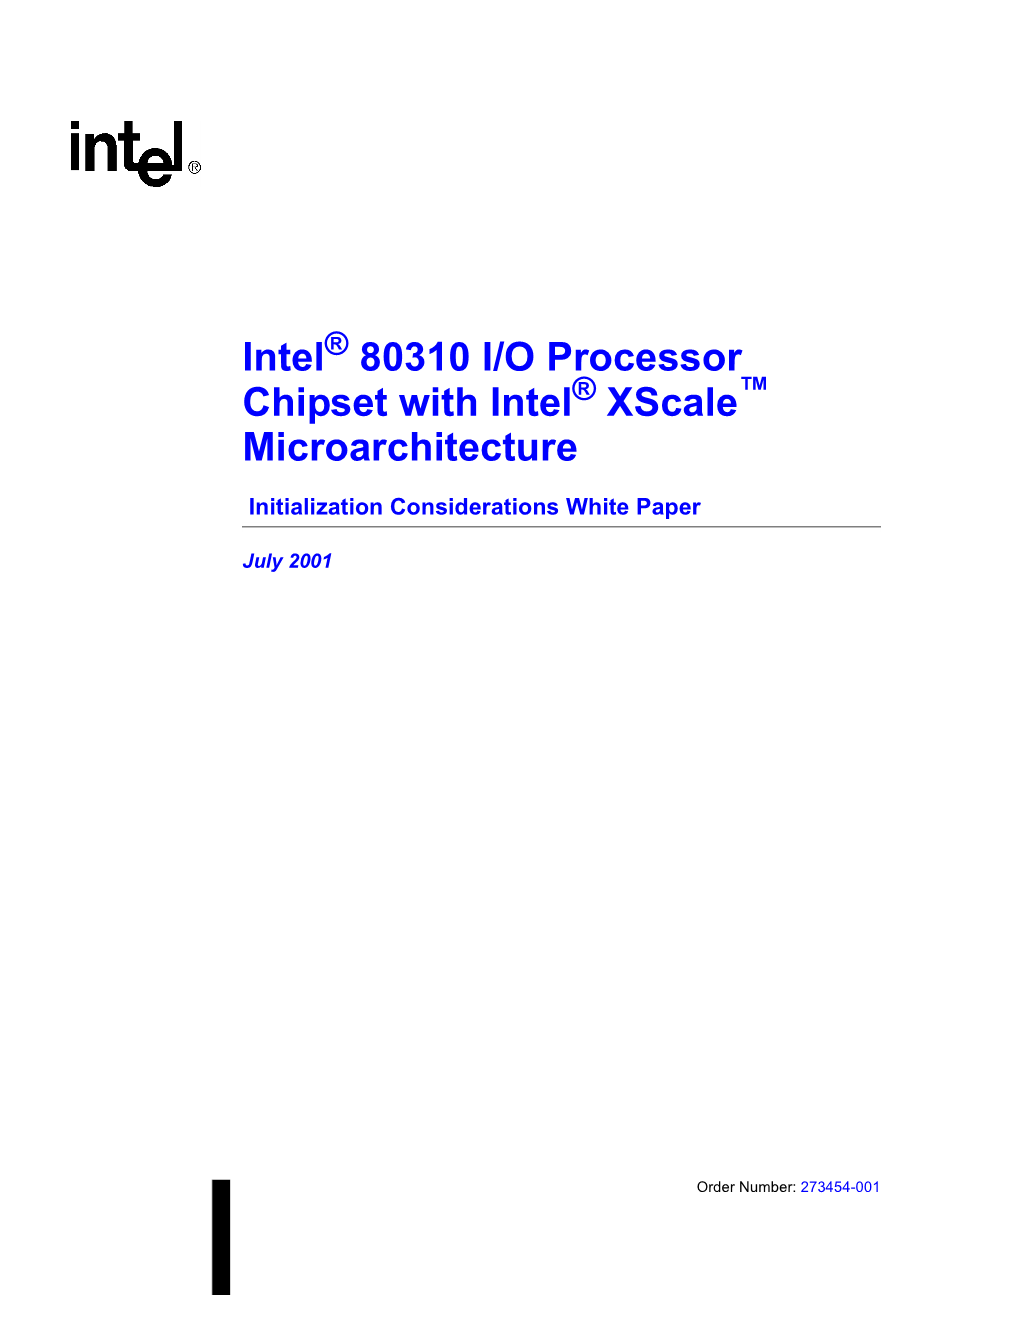 Intel 80310 I/O Processor Chipset with Intel Xscale Microarchitecture